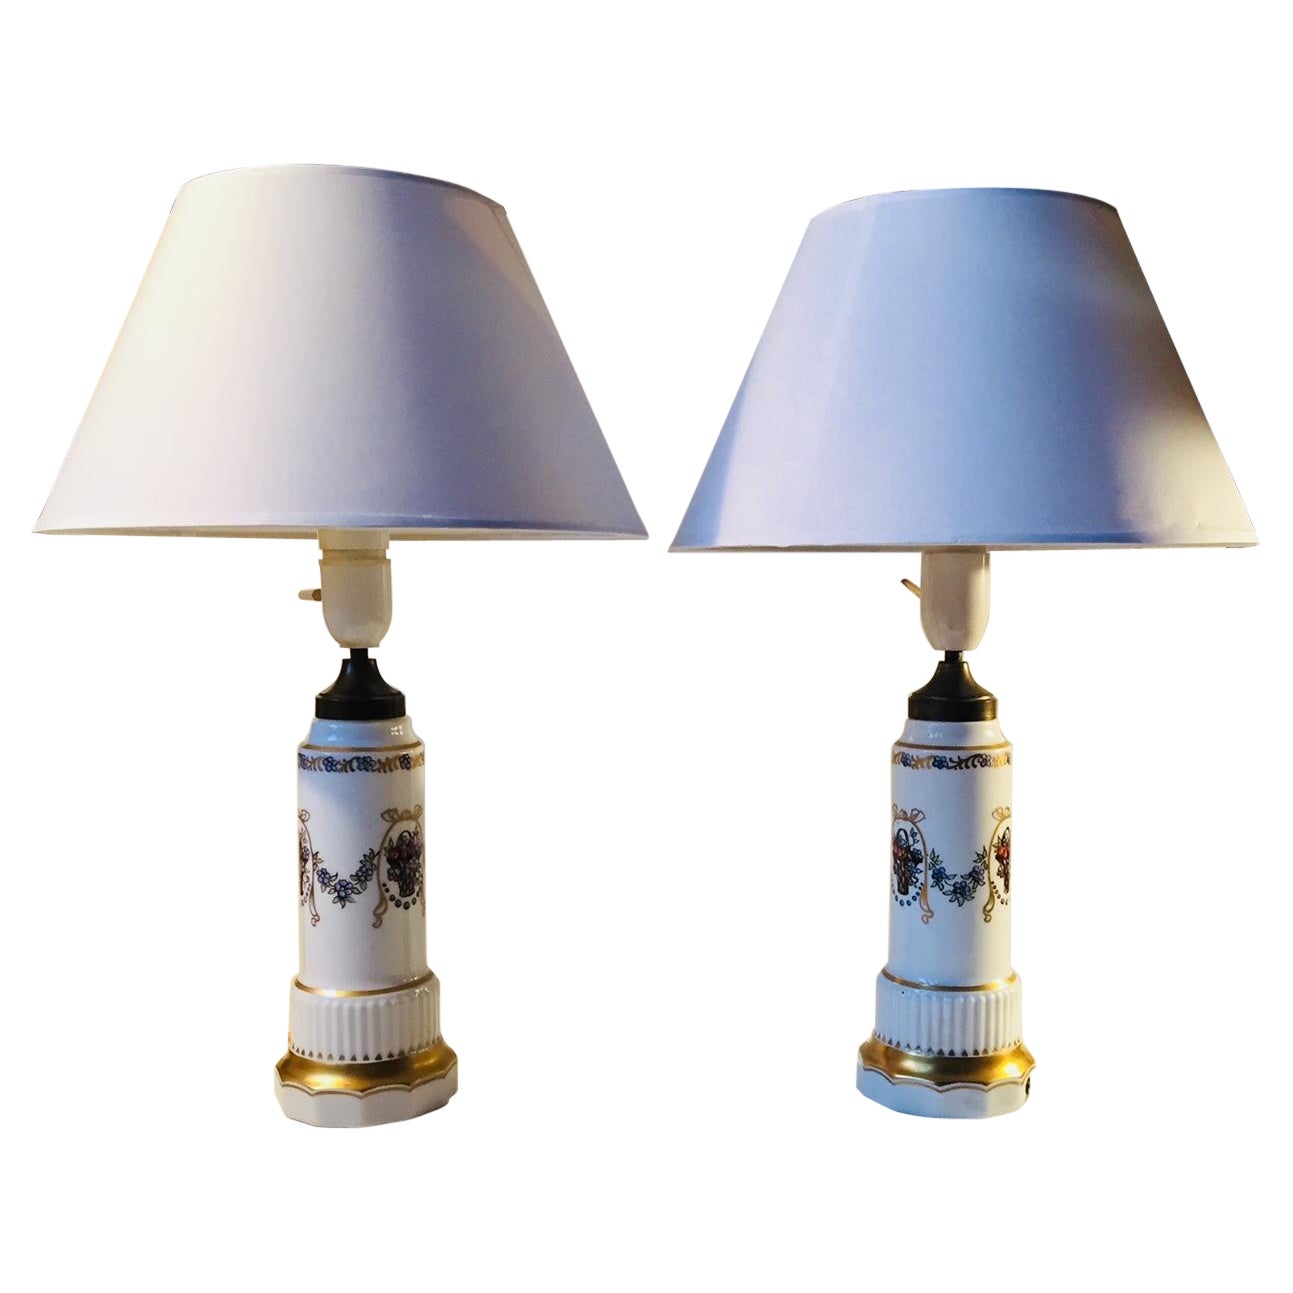 Dahl Jensen a Pair of Porcelain Table Lamps with Fruits, Flowers and Gold Enamel For Sale